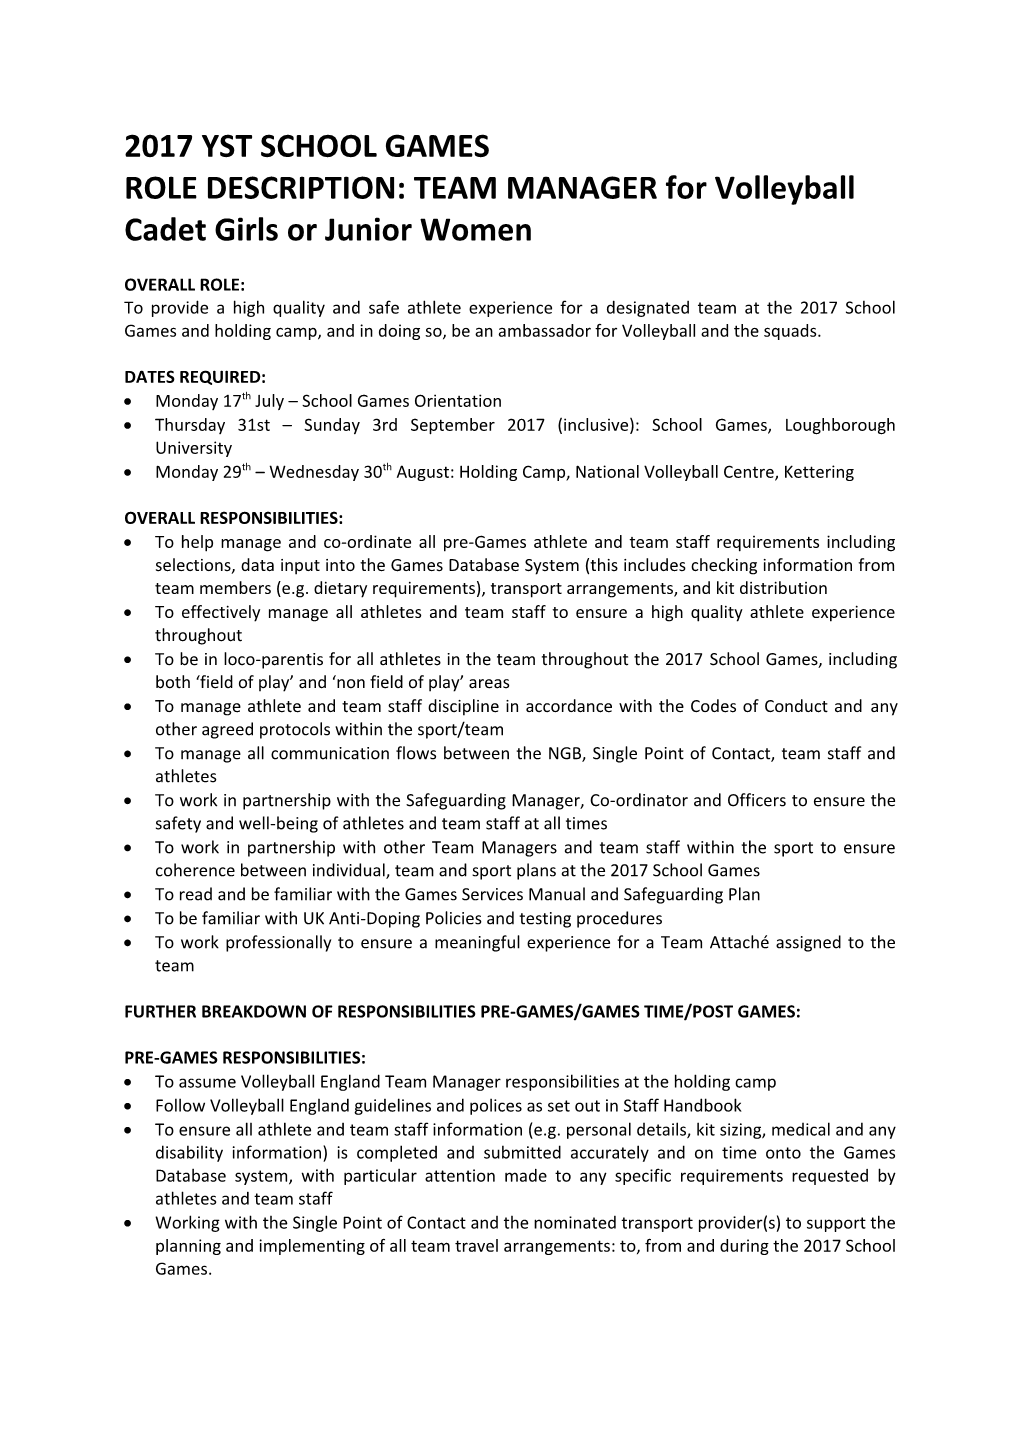 ROLE DESCRIPTION: TEAM MANAGER for Volleyball Cadet Girls Or Junior Women